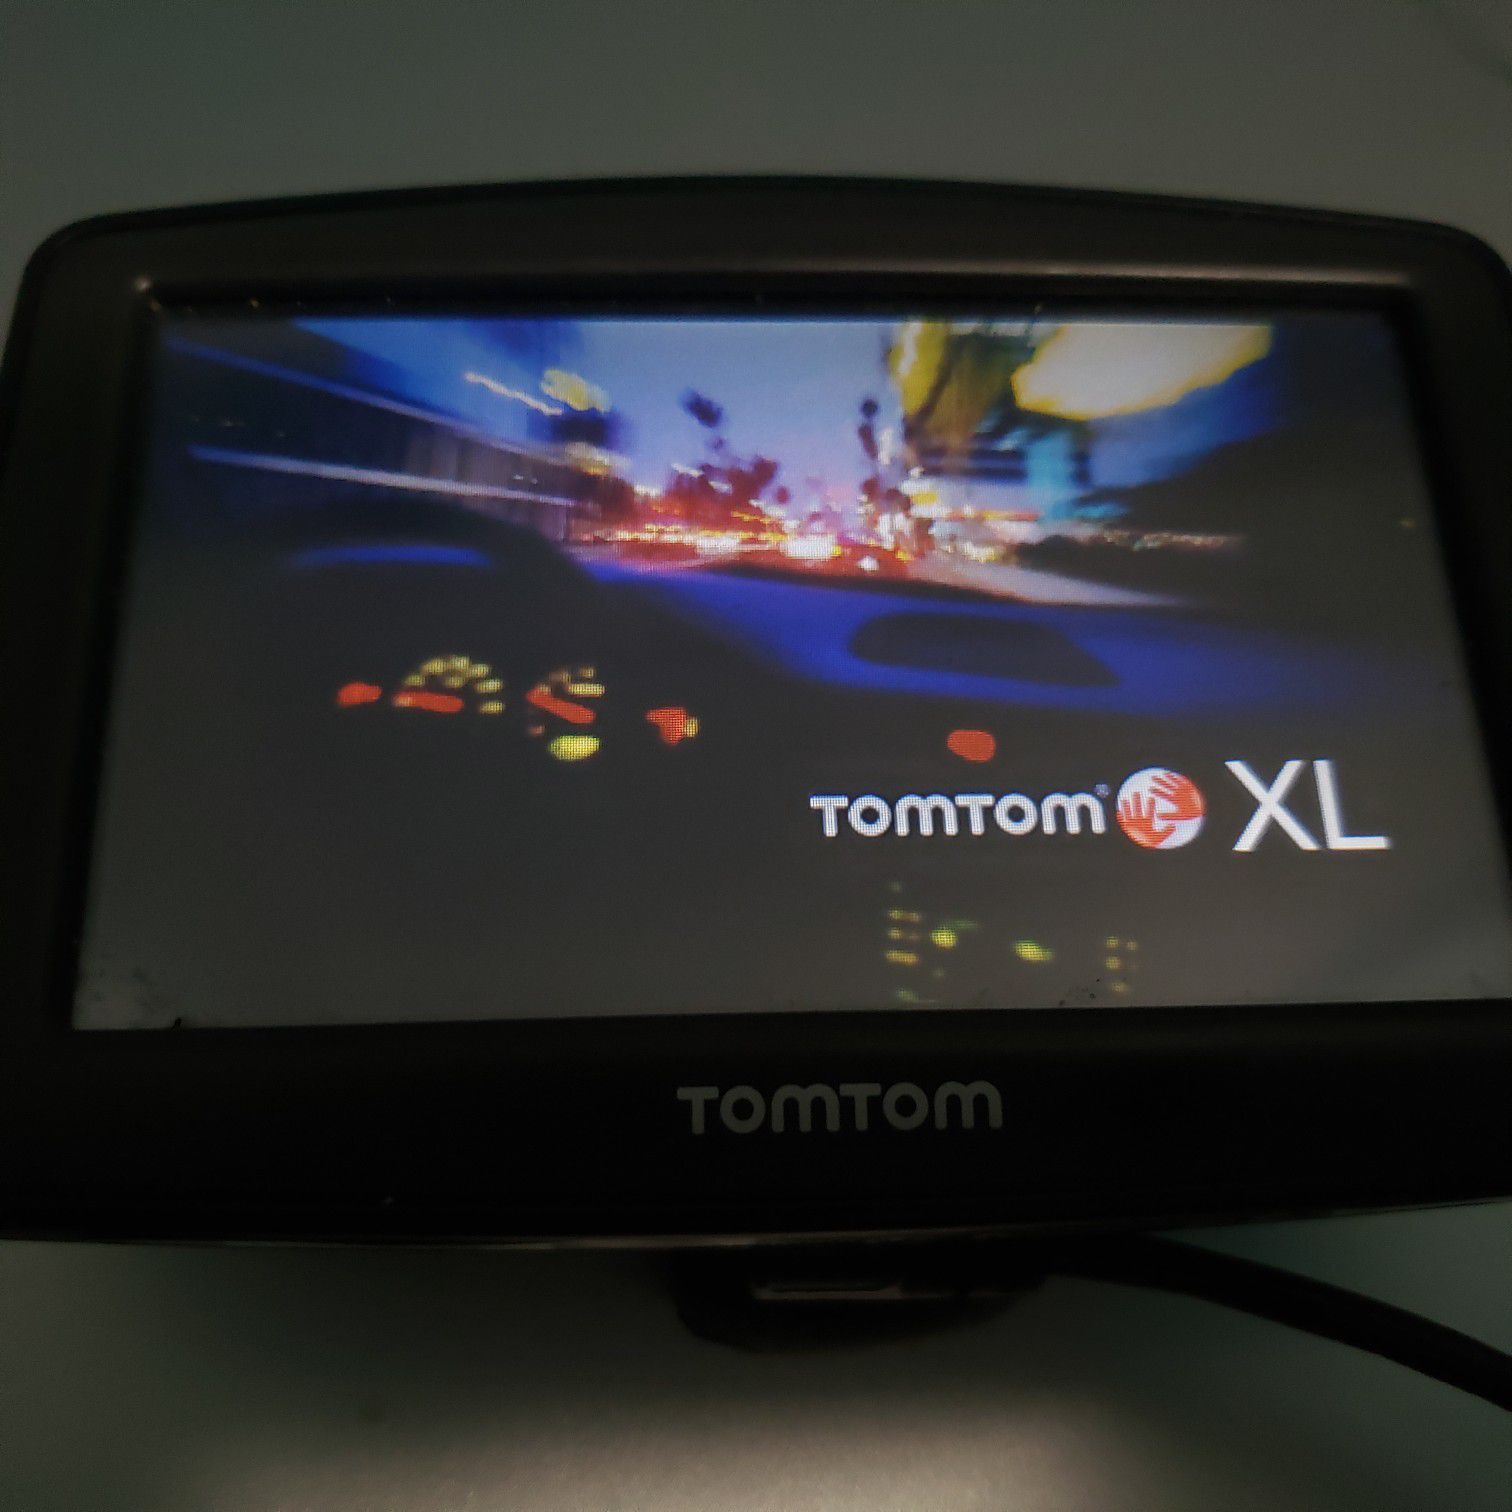 TomTom XL GPS with USB charger and mounting